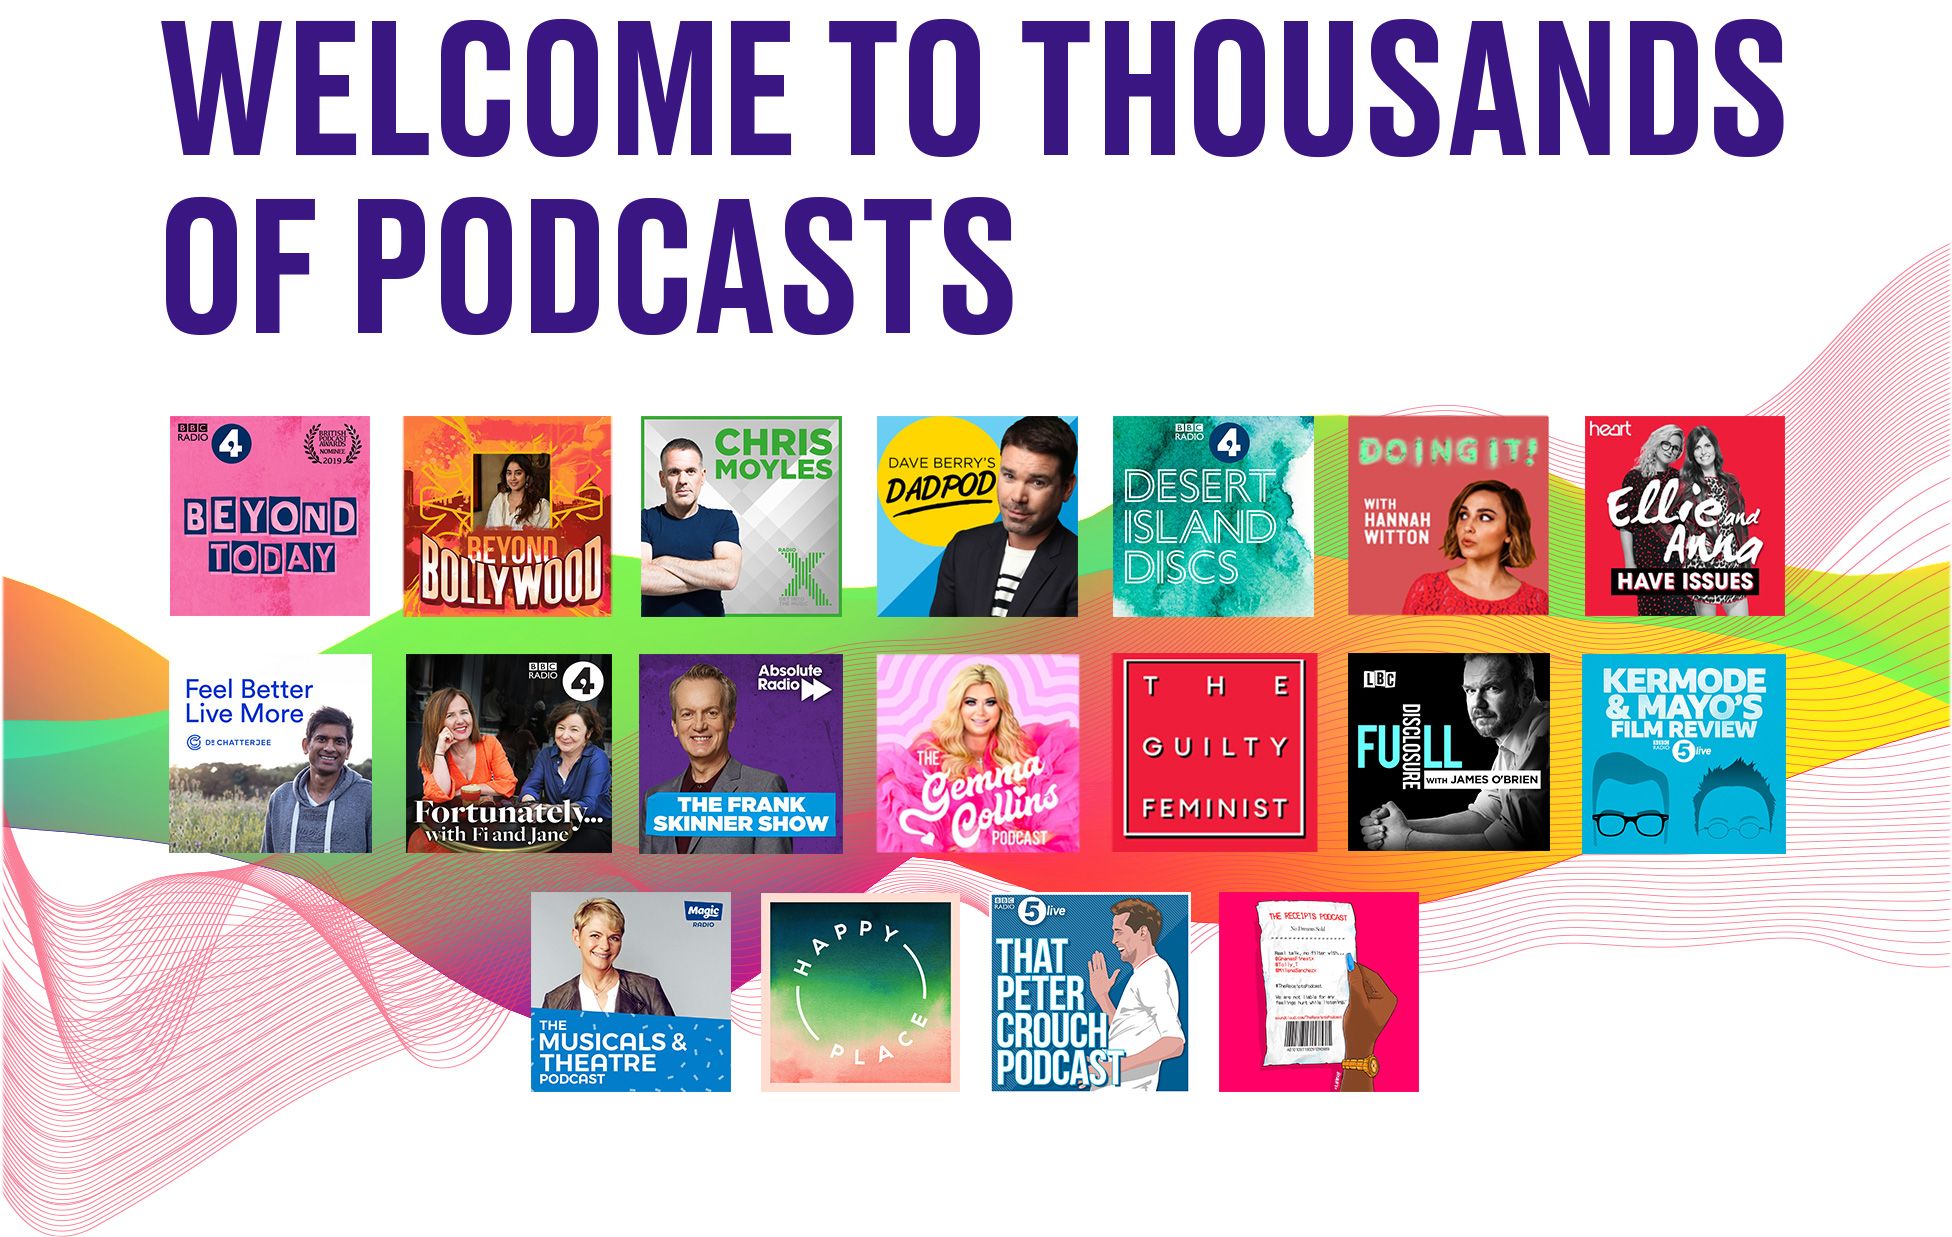 Thousands of podcasts